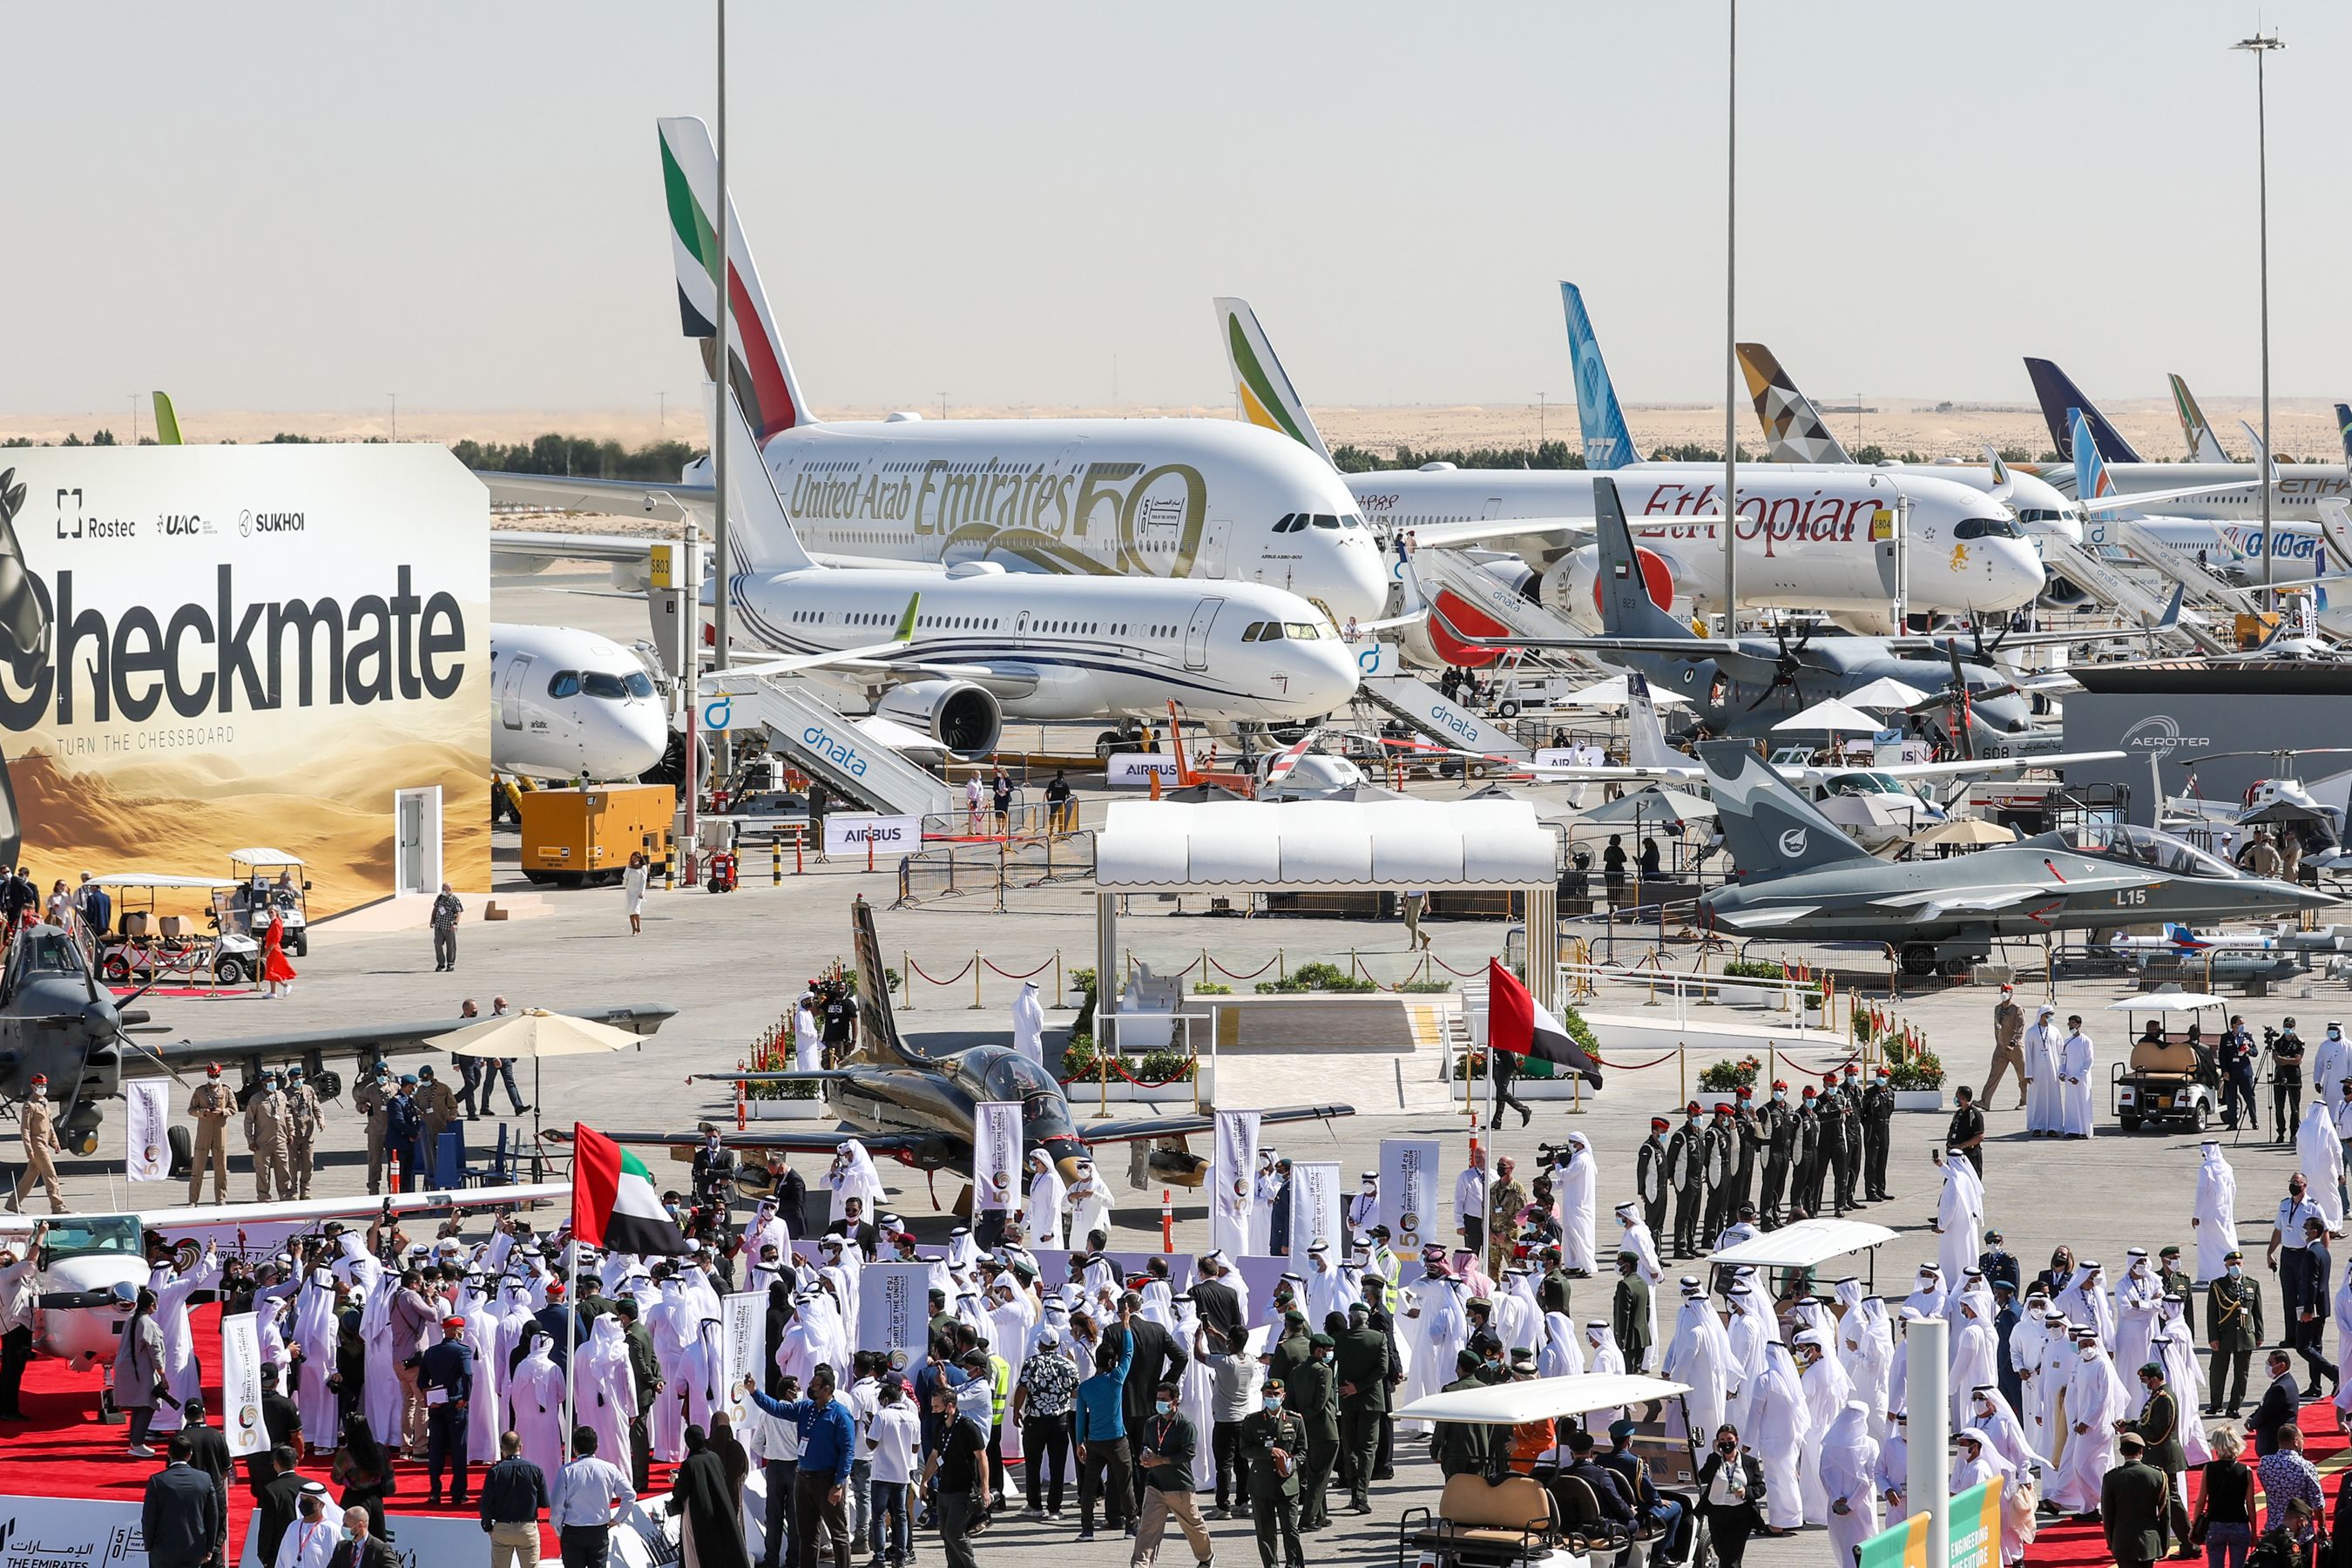 Hundreds of people and several aircraft at the Dubai Airshow.